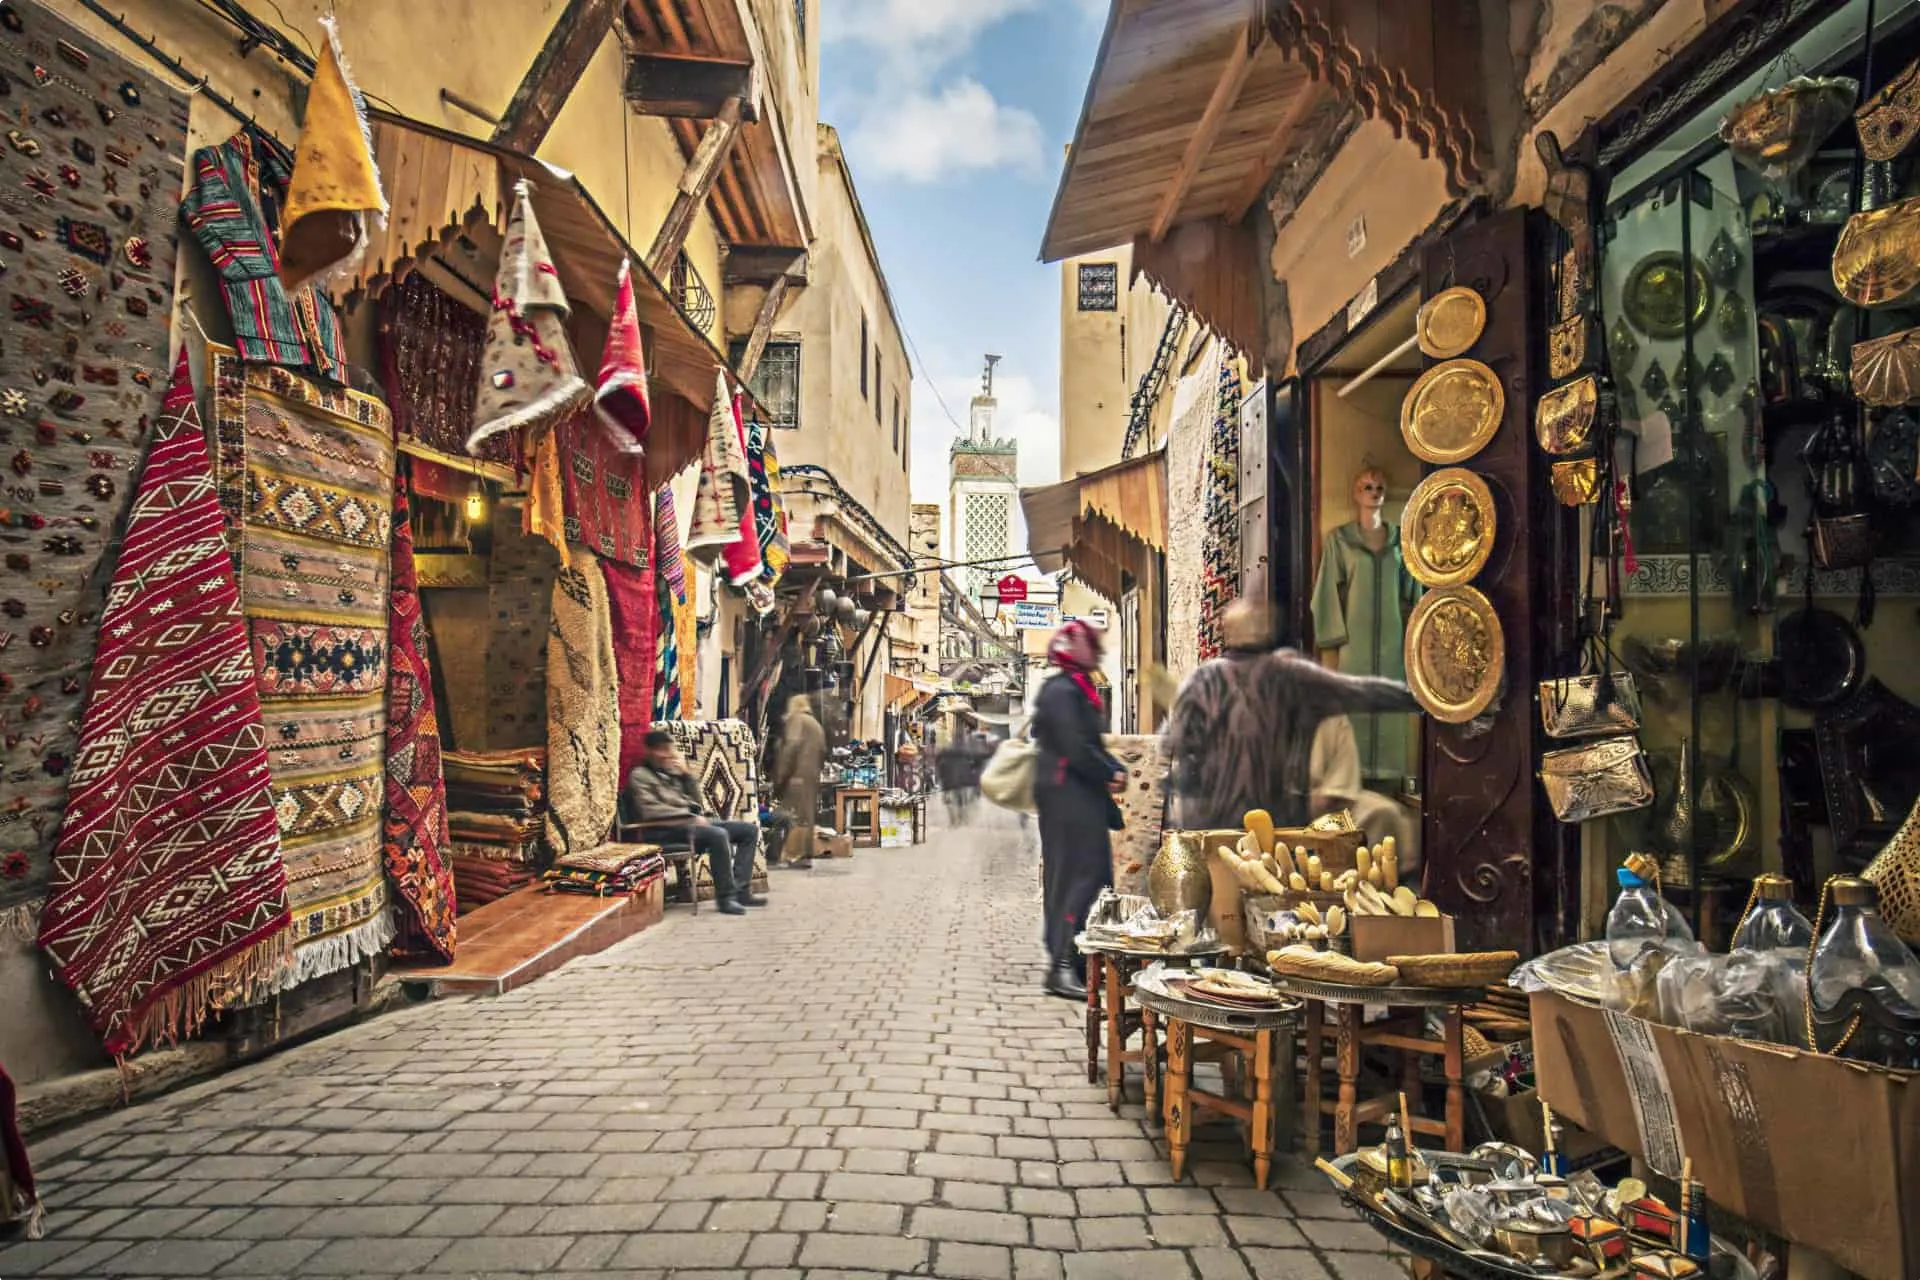 Fes is a UNESCO World Heritage Site renowned for its well-preserved medieval old town, known as Fes el-Bali. Lose yourself in its labyrinthine streets, visit the famous tanneries, and marvel at the intricate architecture of its mosques and madrasas. ]]>